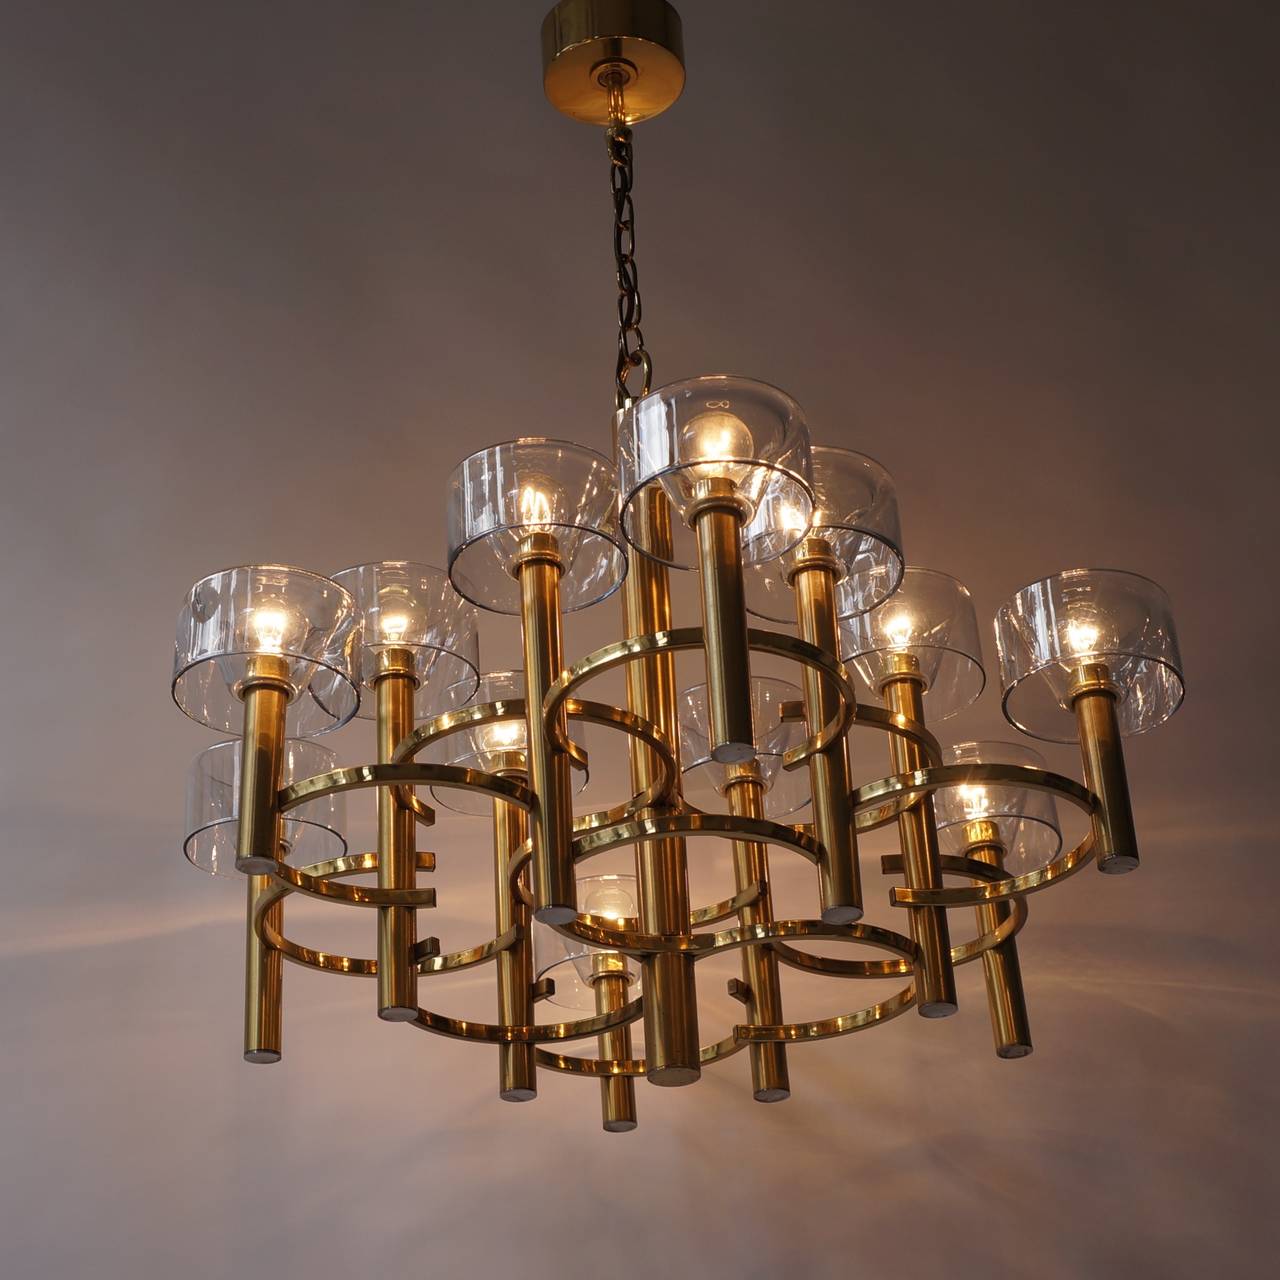 Large Gaetano Sciolari chandelier with brass and glass tubes.
Total height 90 cm.
12 bulbs.